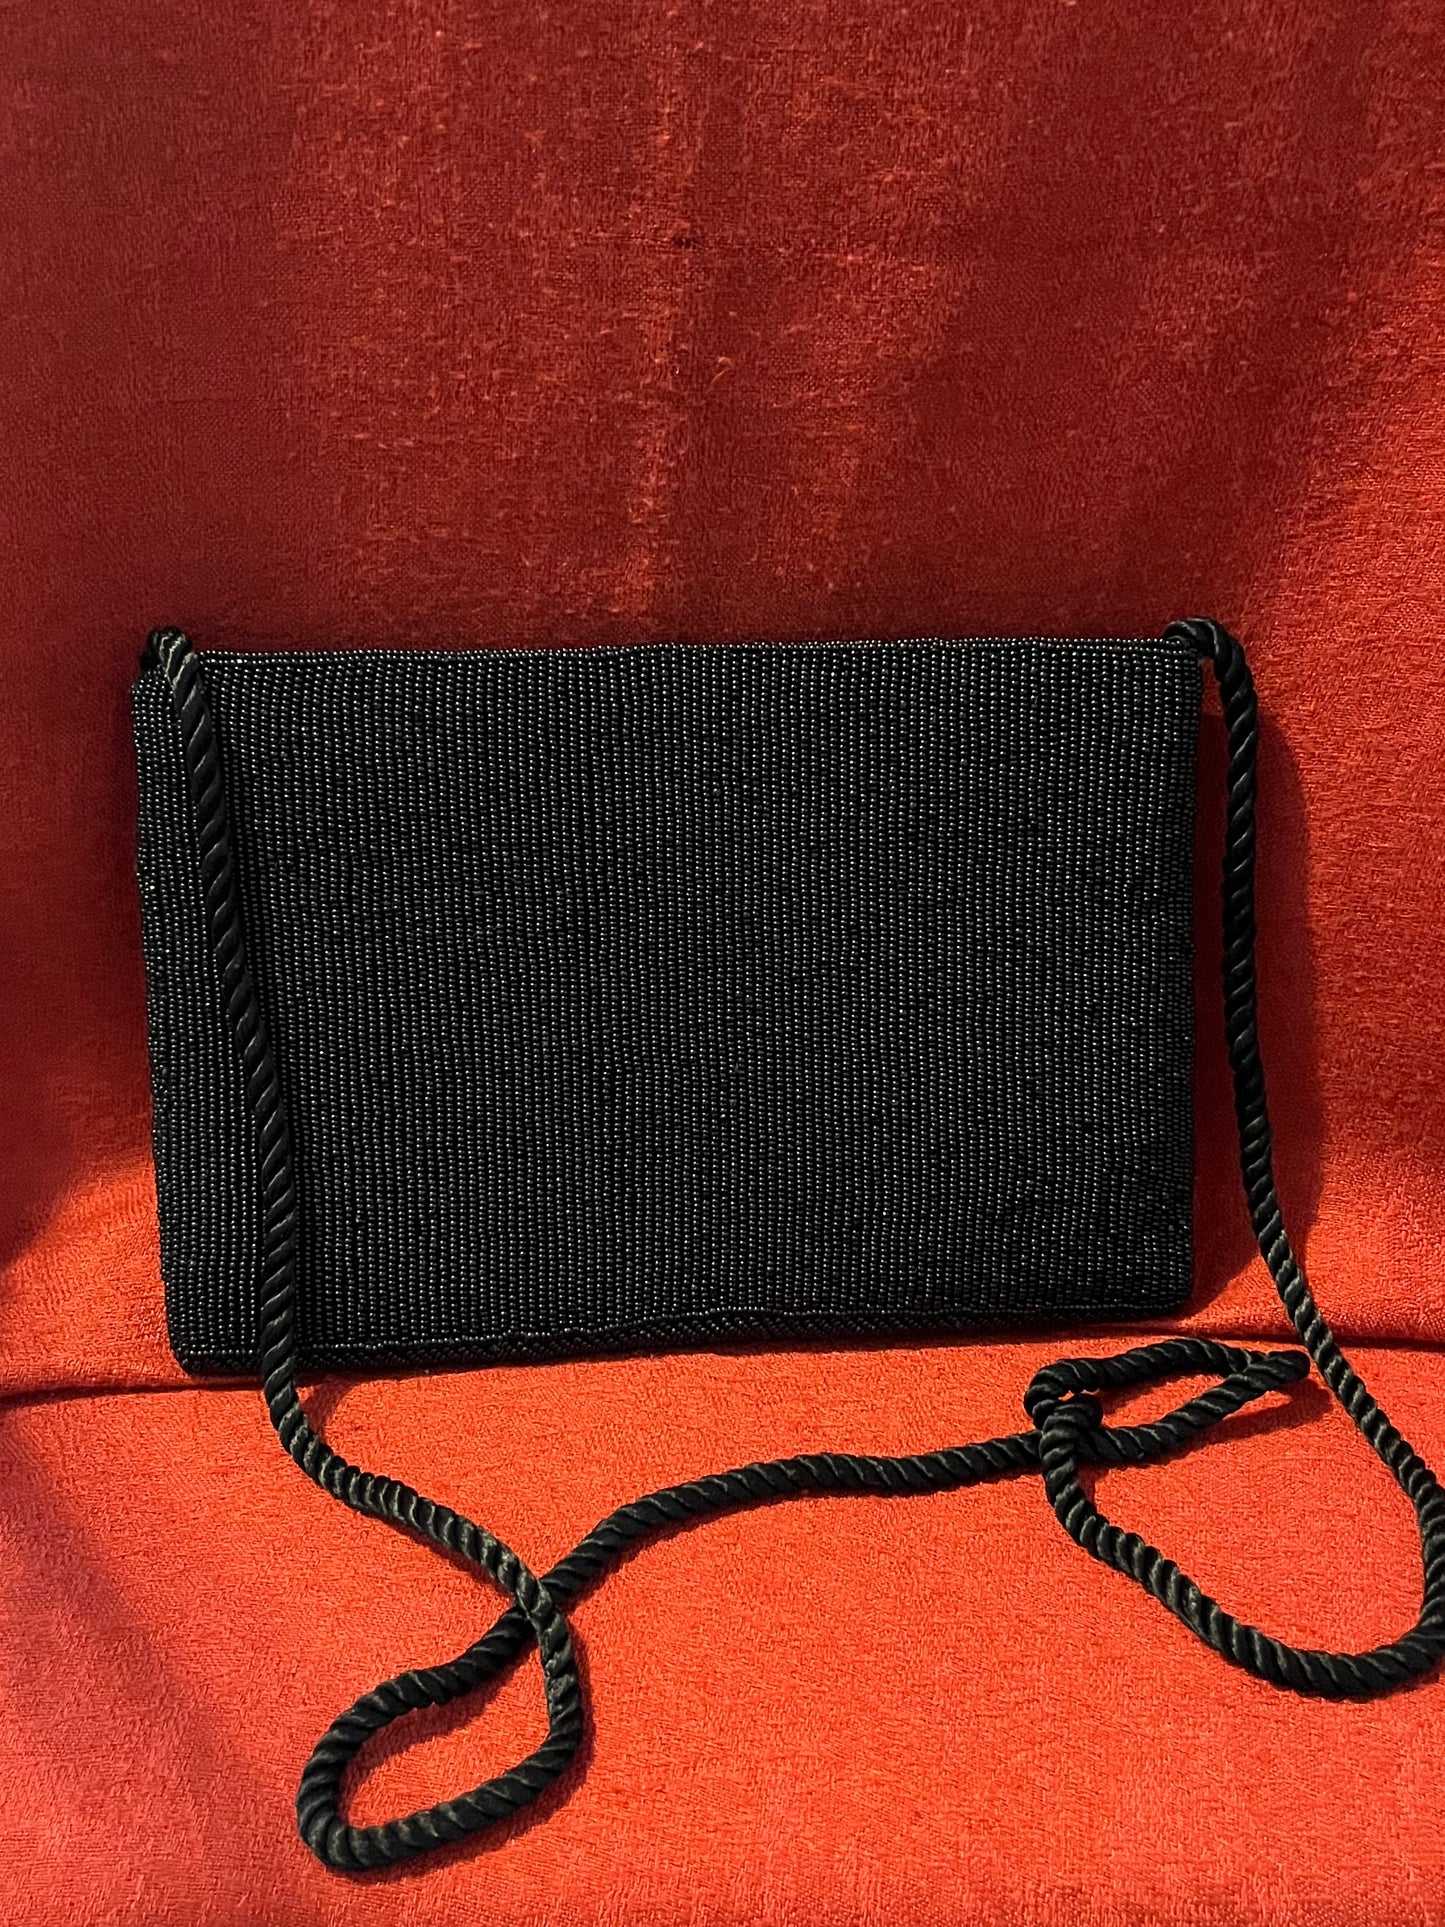 Multi-Colored Evening Bag with Satin Cord Strap